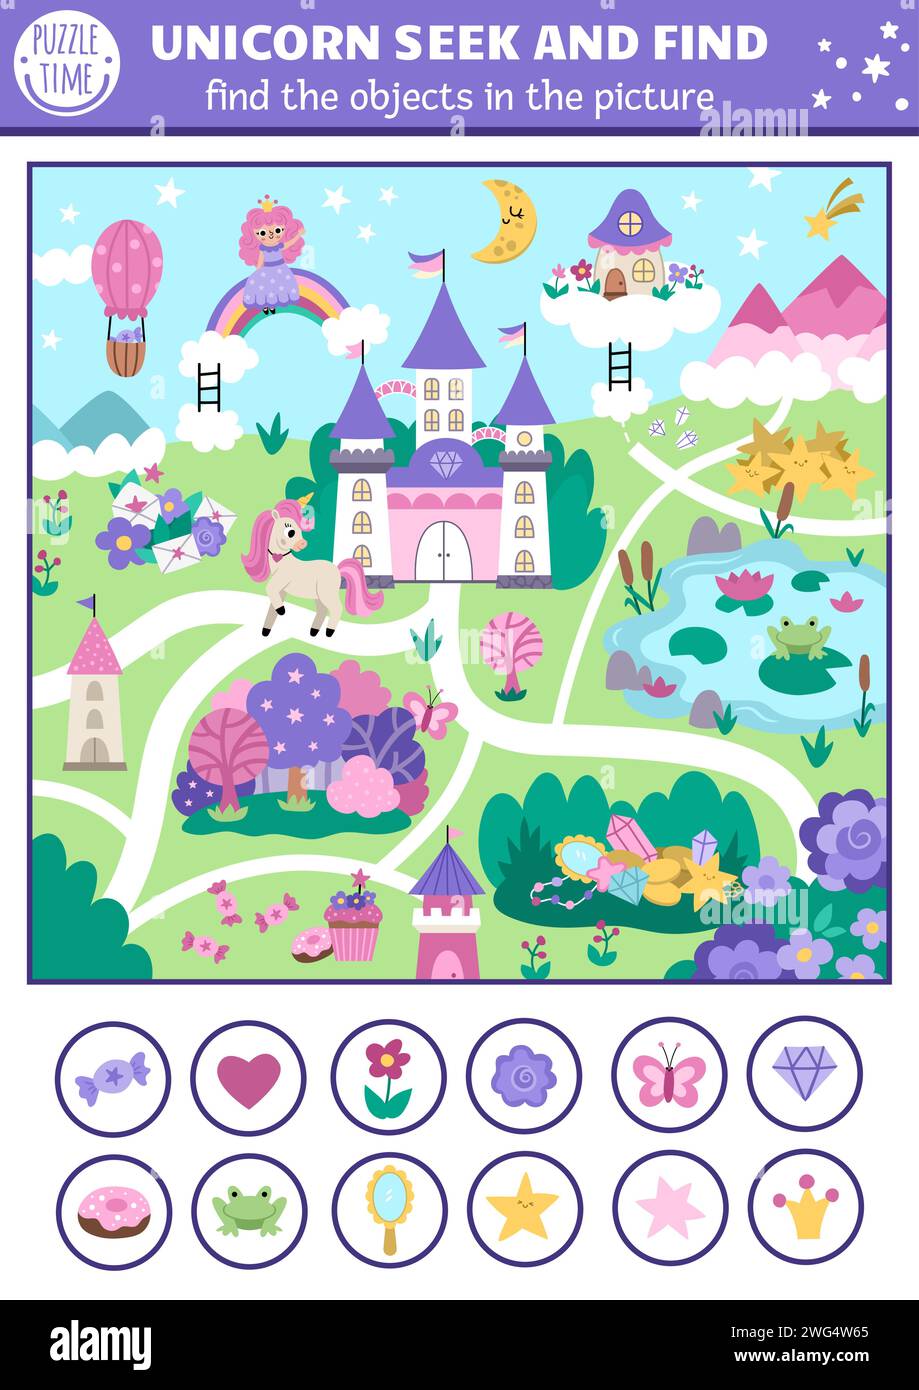 Unicorn vector searching game with magic village landscape. Spot hidden objects. Simple fantasy or fairytale world seek and find printable activity fo Stock Vector